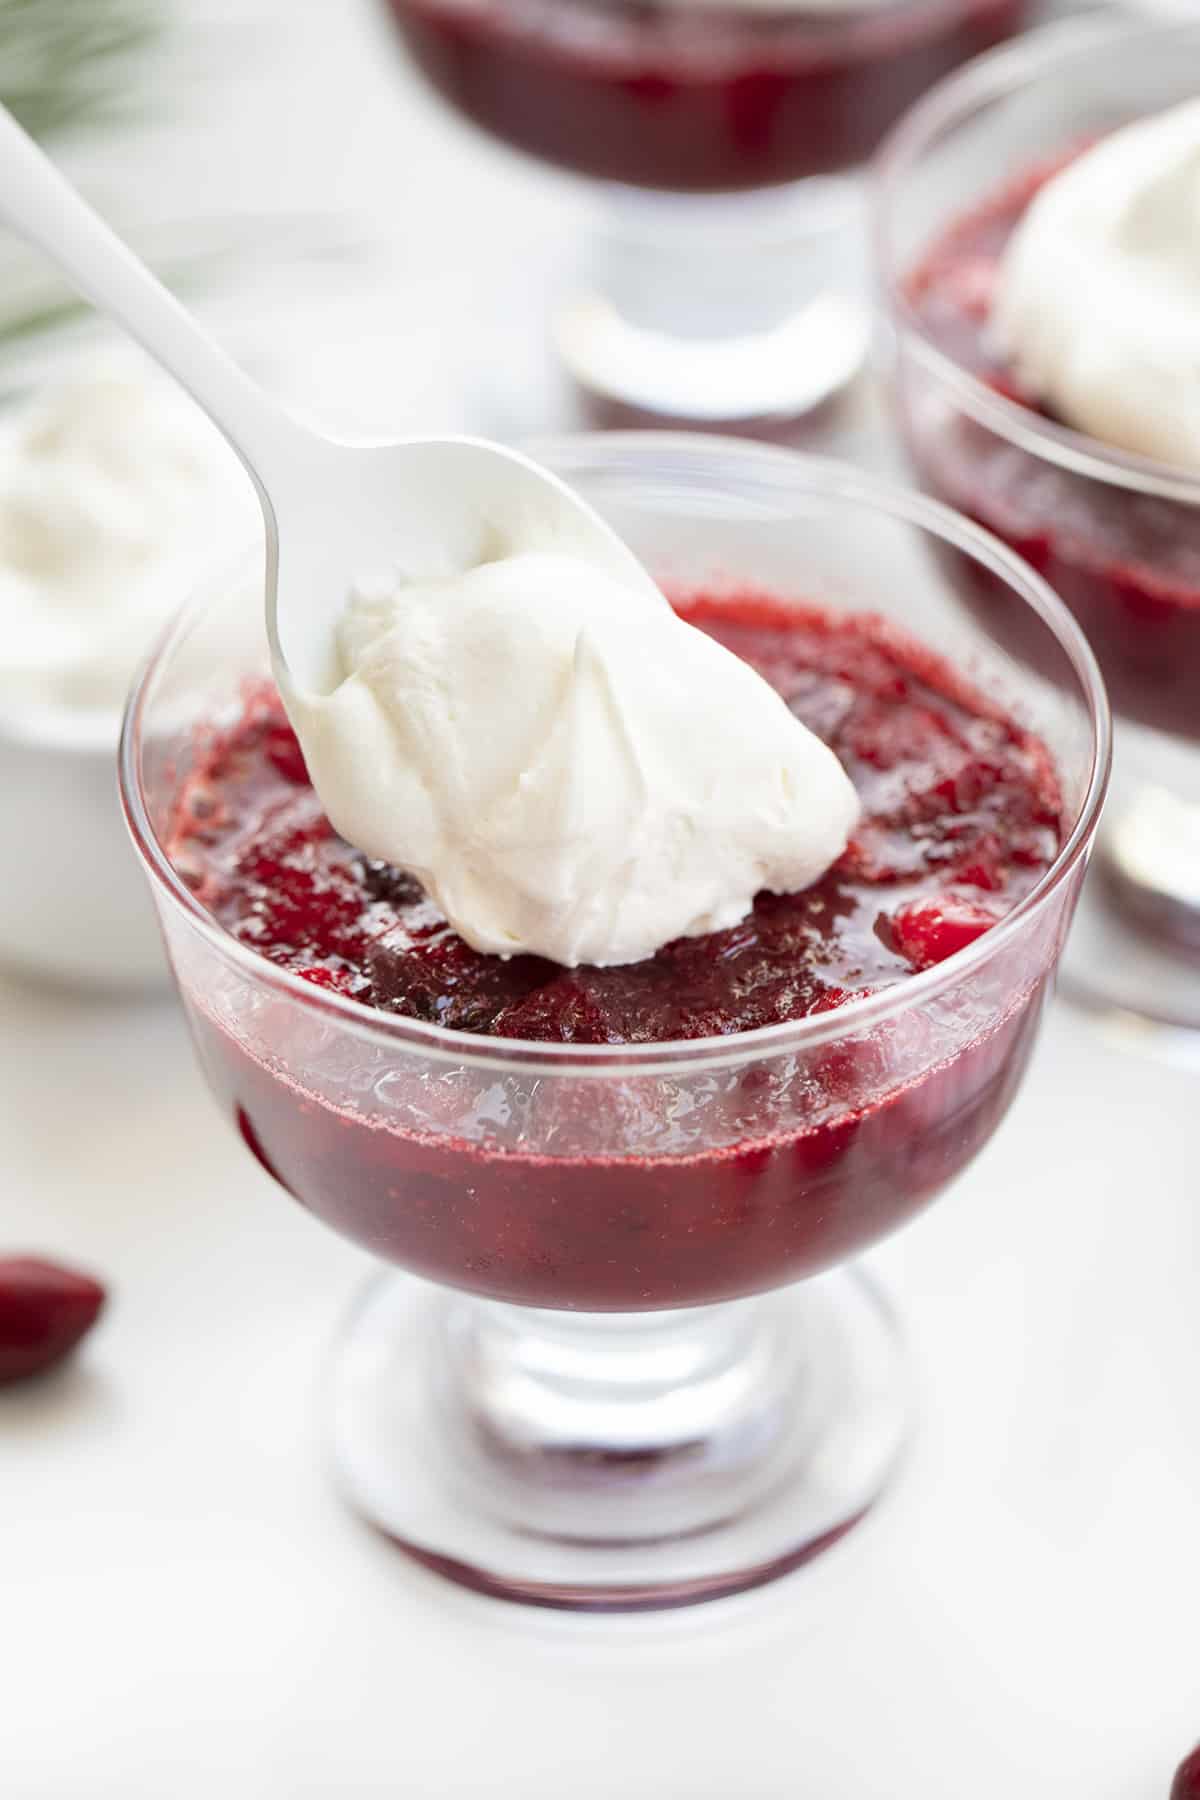 Cranberries in Snow Desserts on a White Counter with Cranberries and Pine while Creamy Whipped Topping is Added. Dessert, Holiday Dessert, Christmas Dessert, Thanksgiving Dessert, No Bake Desserts, Cream Cheese Whipped Cream, Cranberry Desserts, i am baker, iambaker